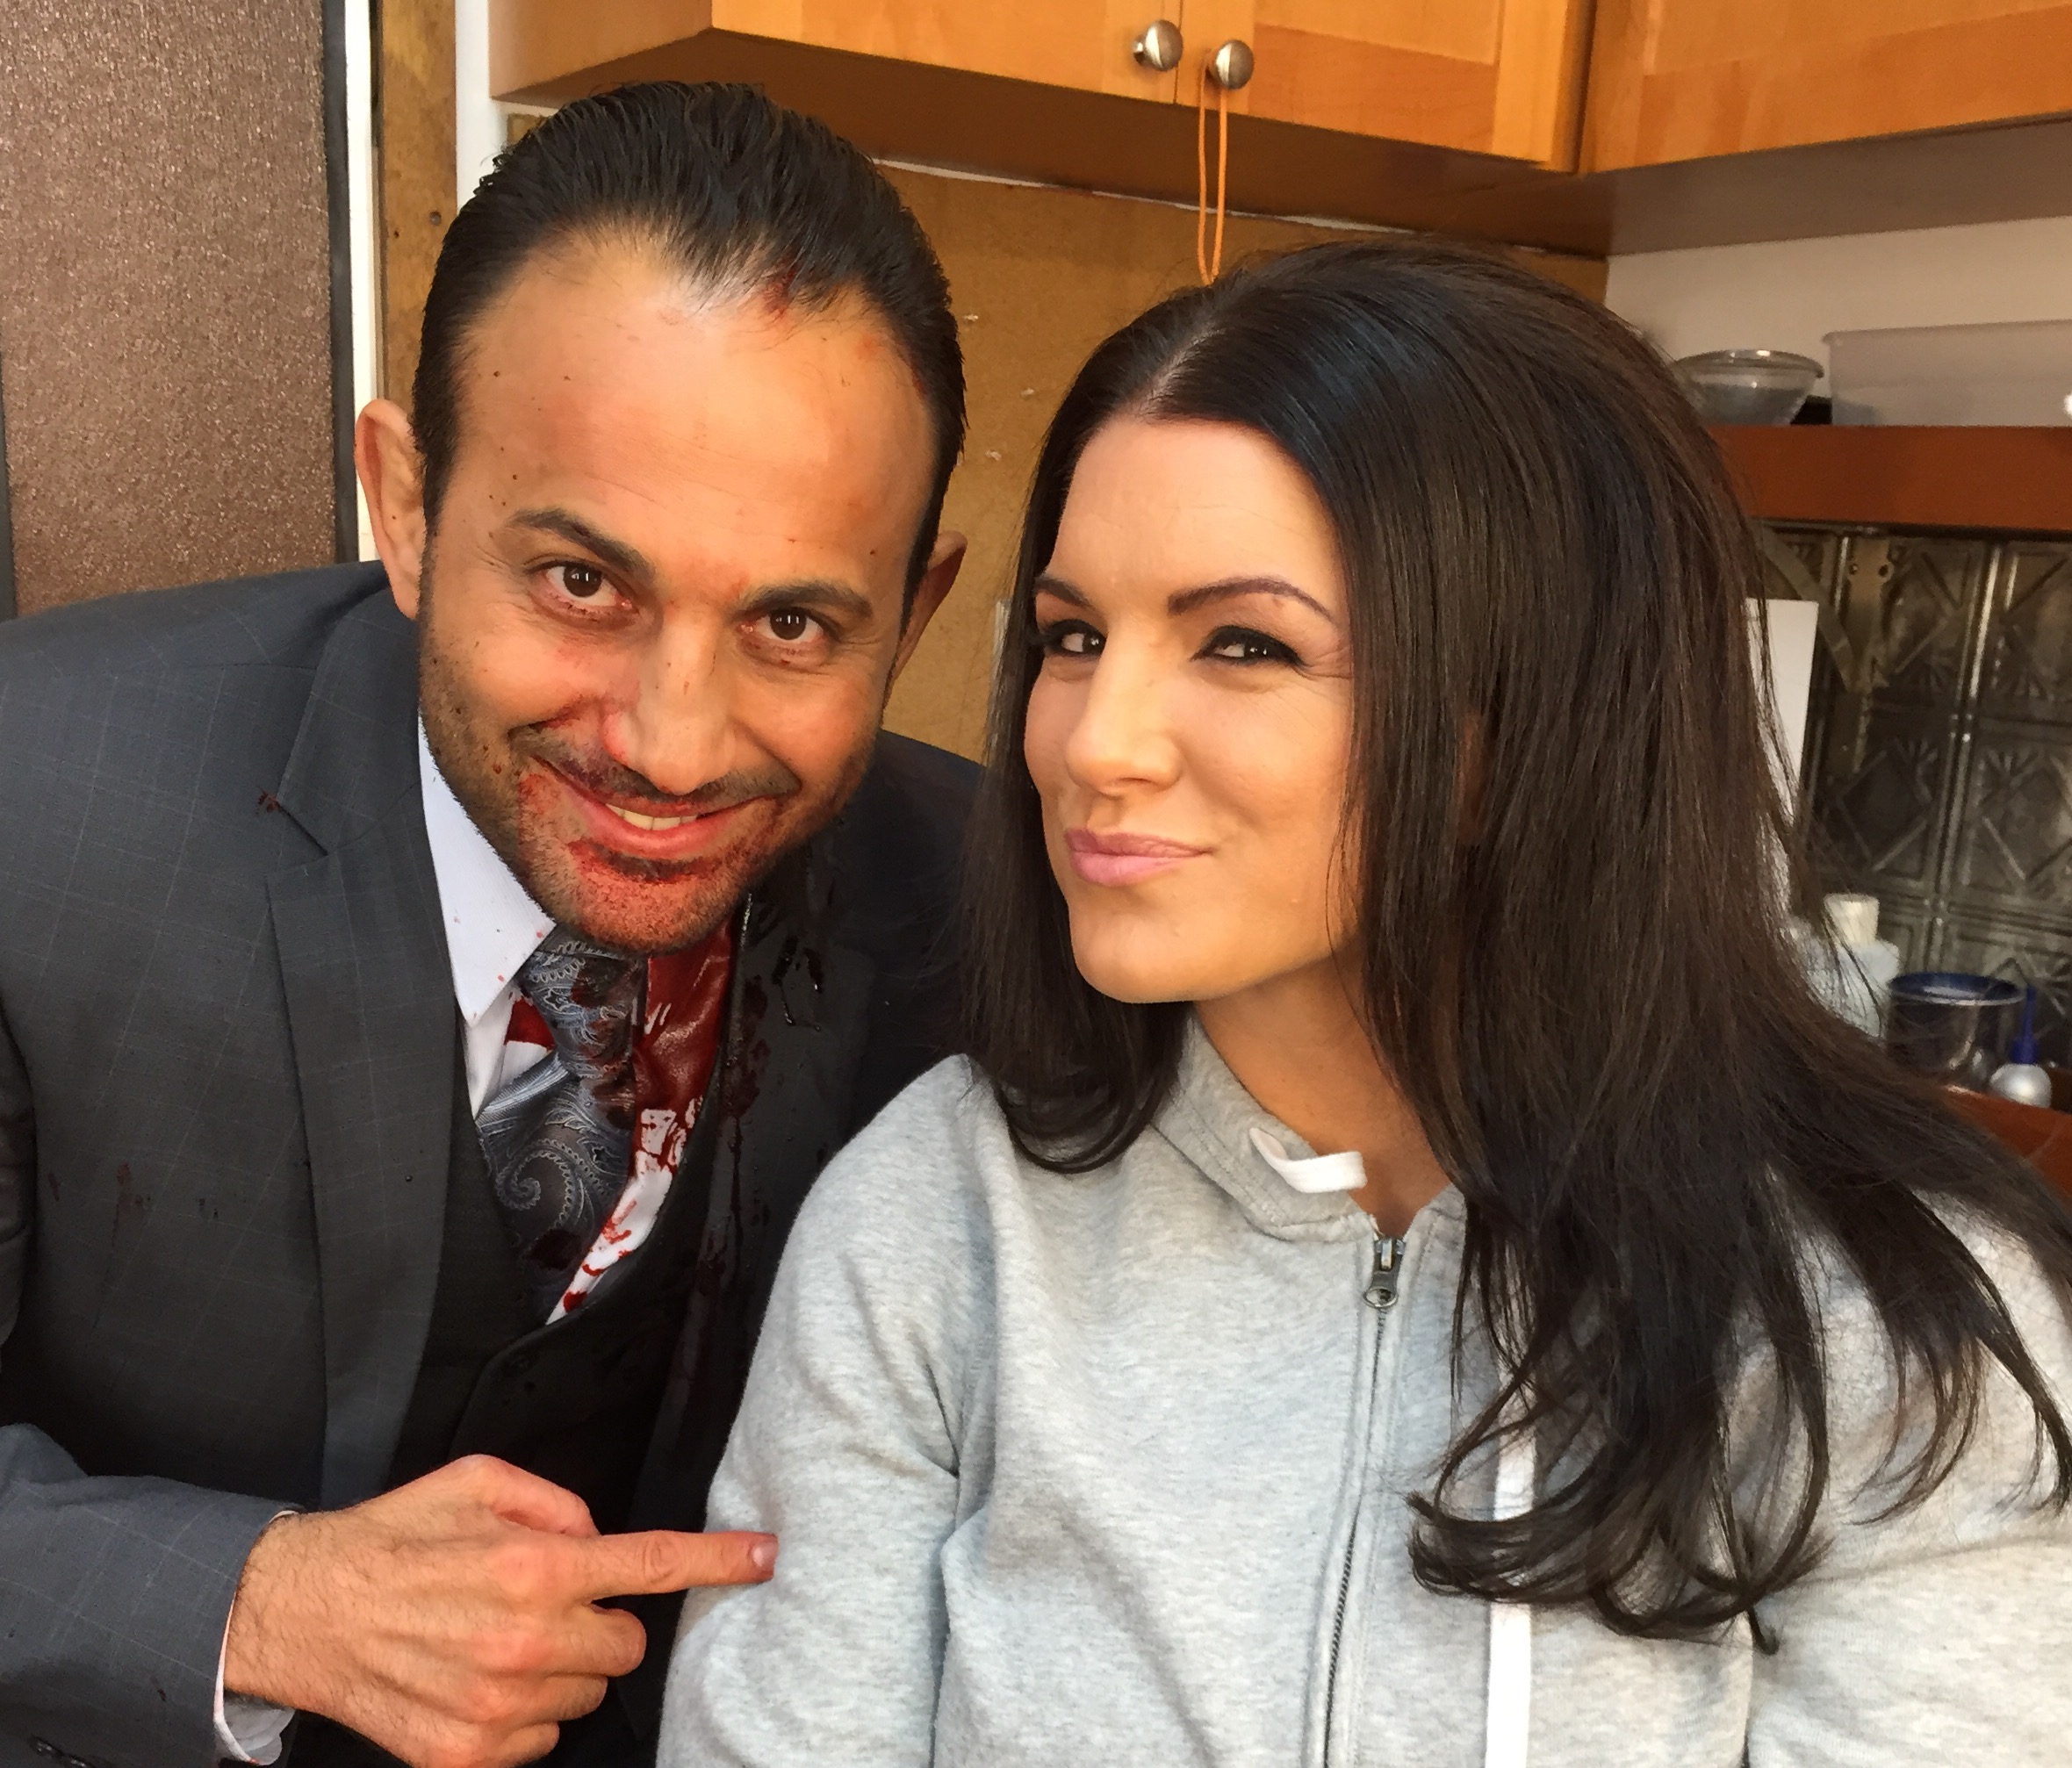 Roman Mitichyan with actress Gina Carano in film Extraction with Bruce Willis.